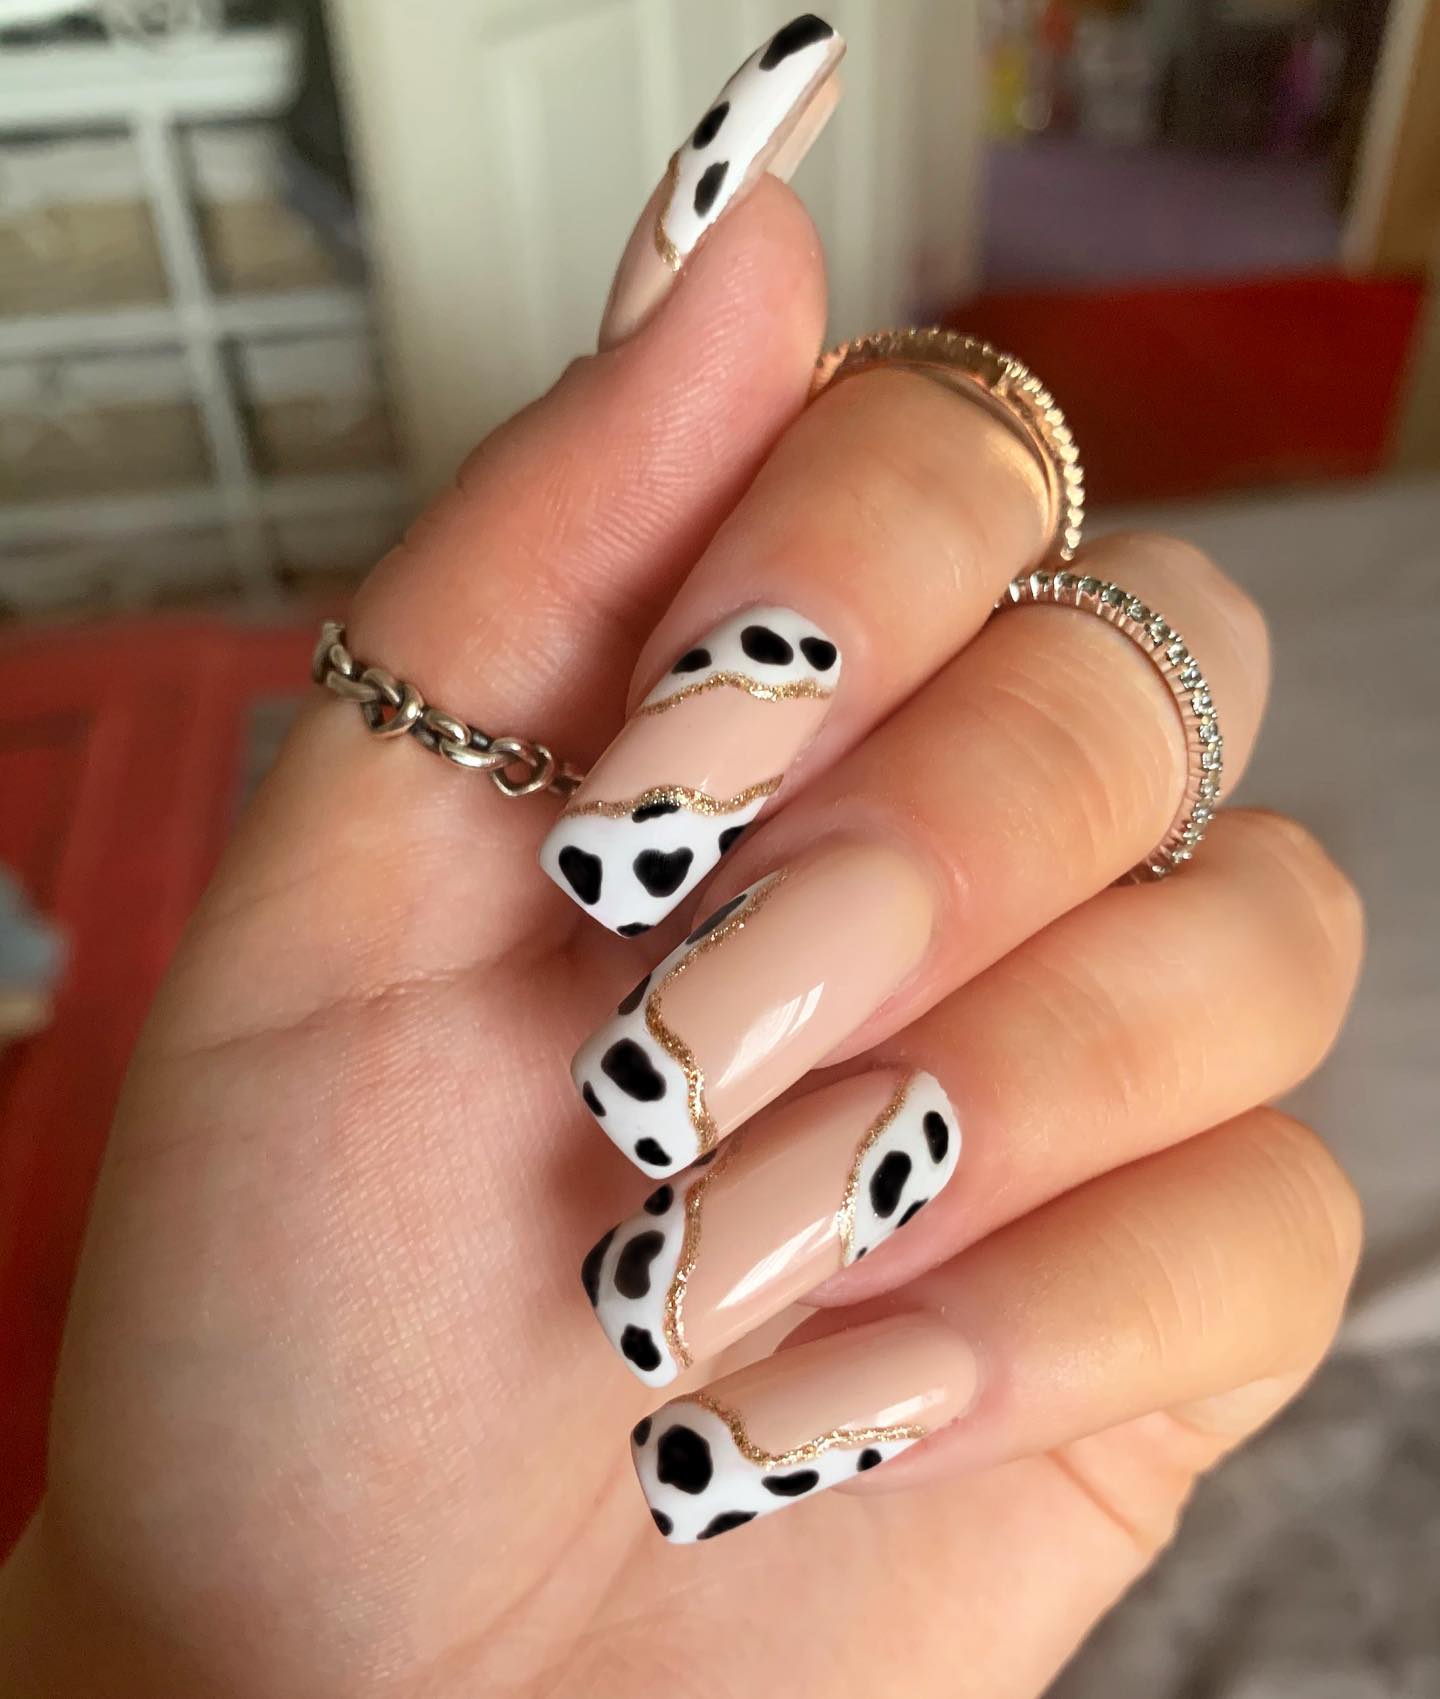 Matching swirl nail art with a cow print is a nice way to show your great taste to everyone! As a base, use a nude nail polish and draw a swirl with glitters to separate cow prints. It is absolutely amazing!